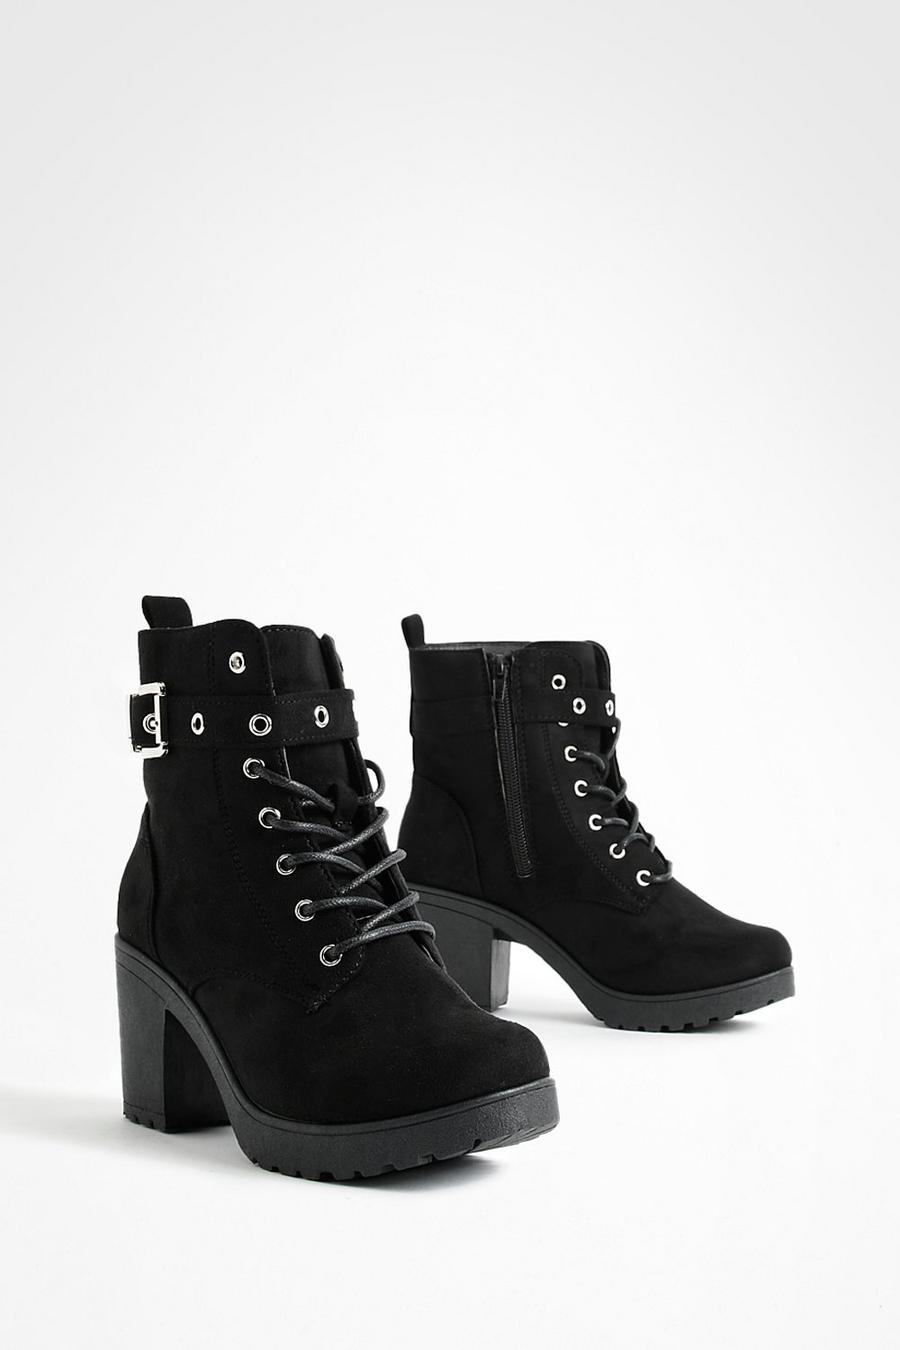 New Look Leather Wide Fit Buckle Lace Up Chunky Boots Vegan in Black Womens Shoes Boots Ankle boots 